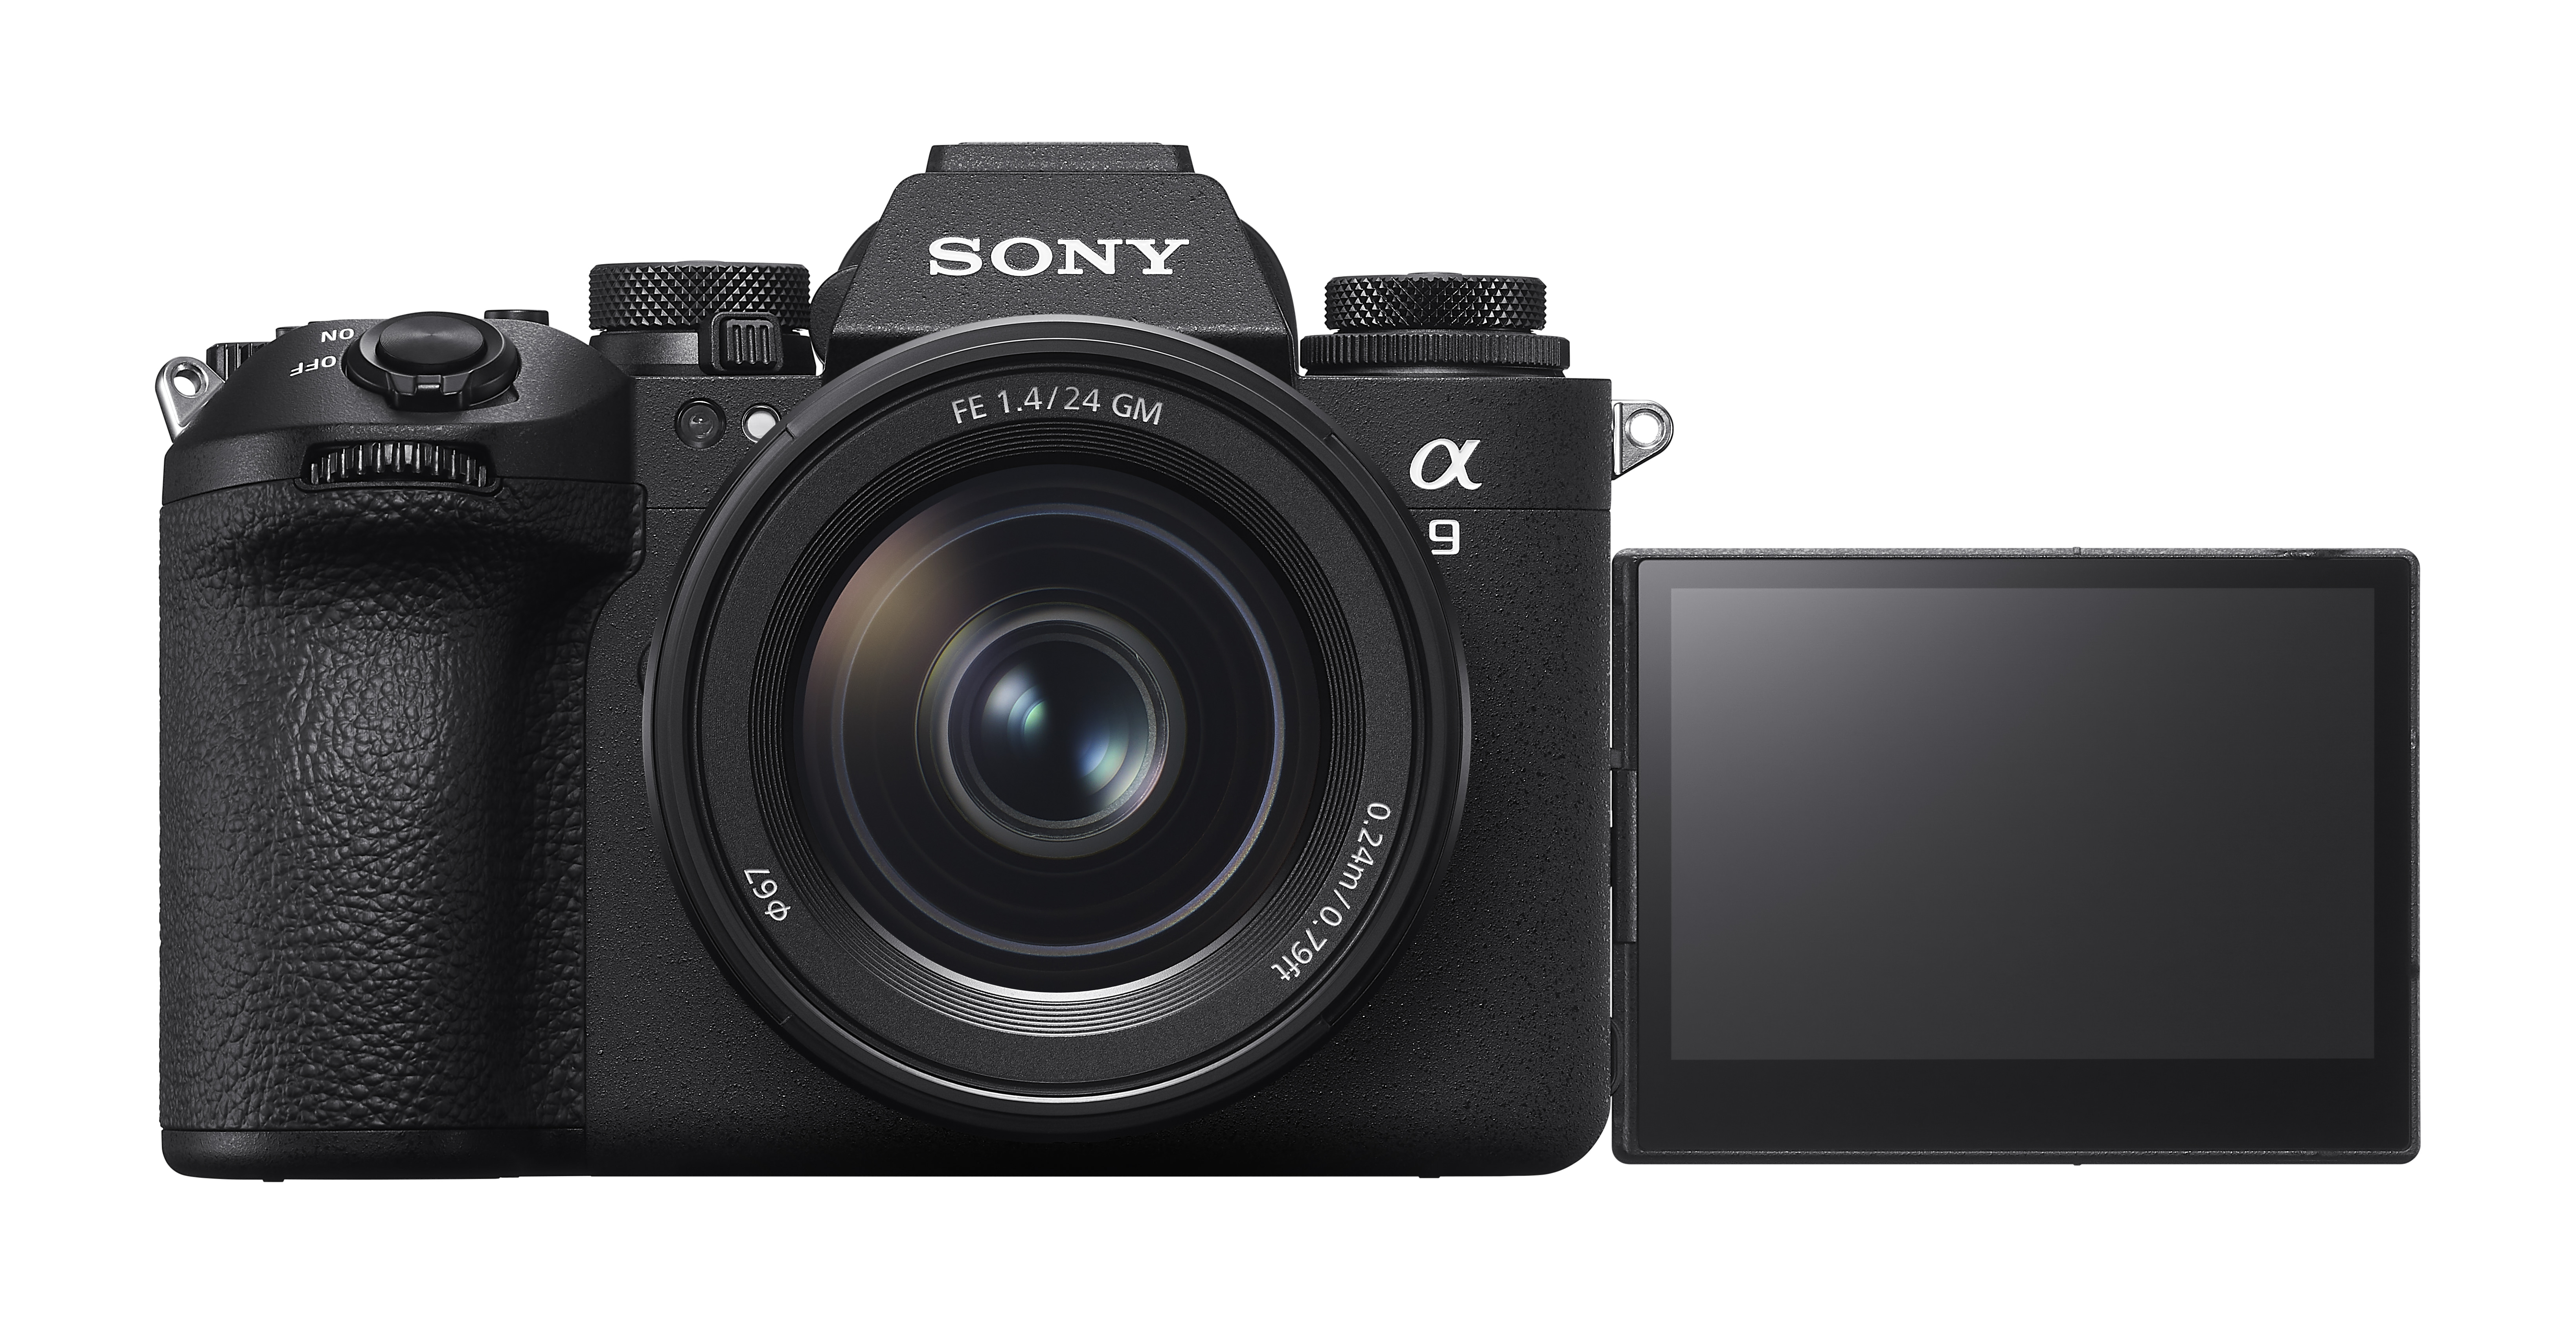 The Sony A9 III is the fastest full-frame camera ever thanks to a global stacked sensor